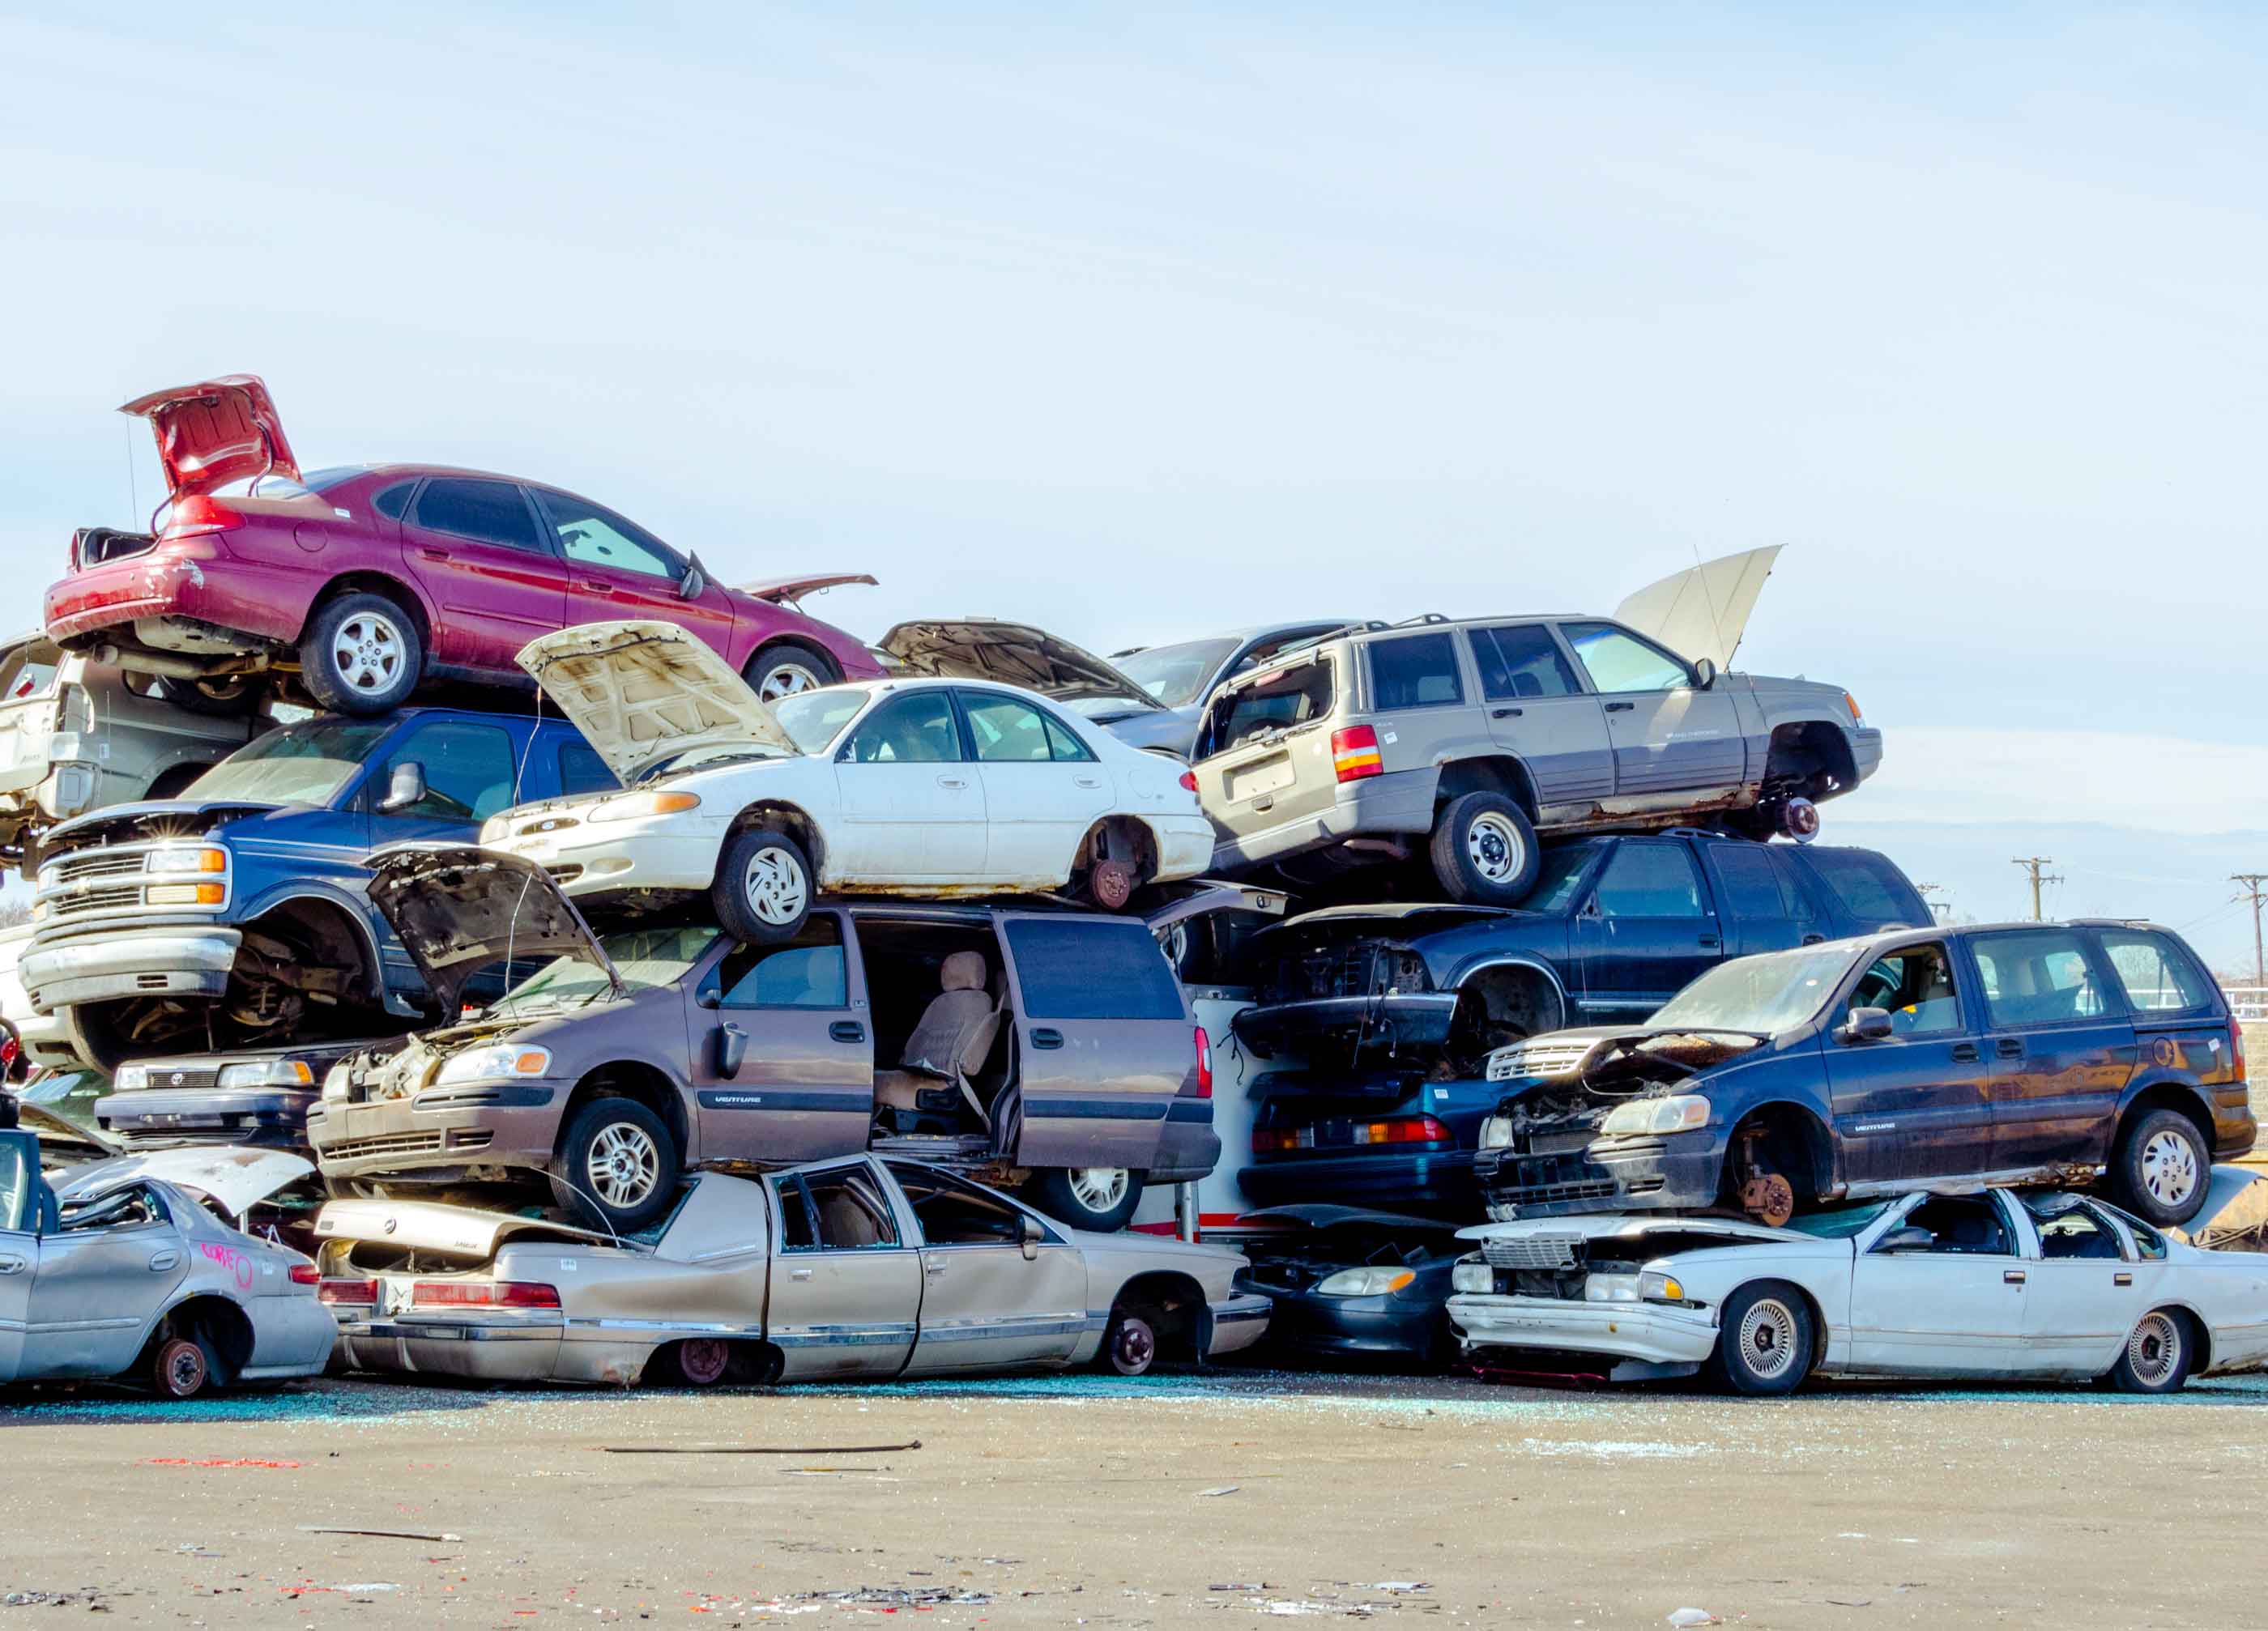 Auto Wreckers & Car Part Suppliers in Adelaide SA – A Master List